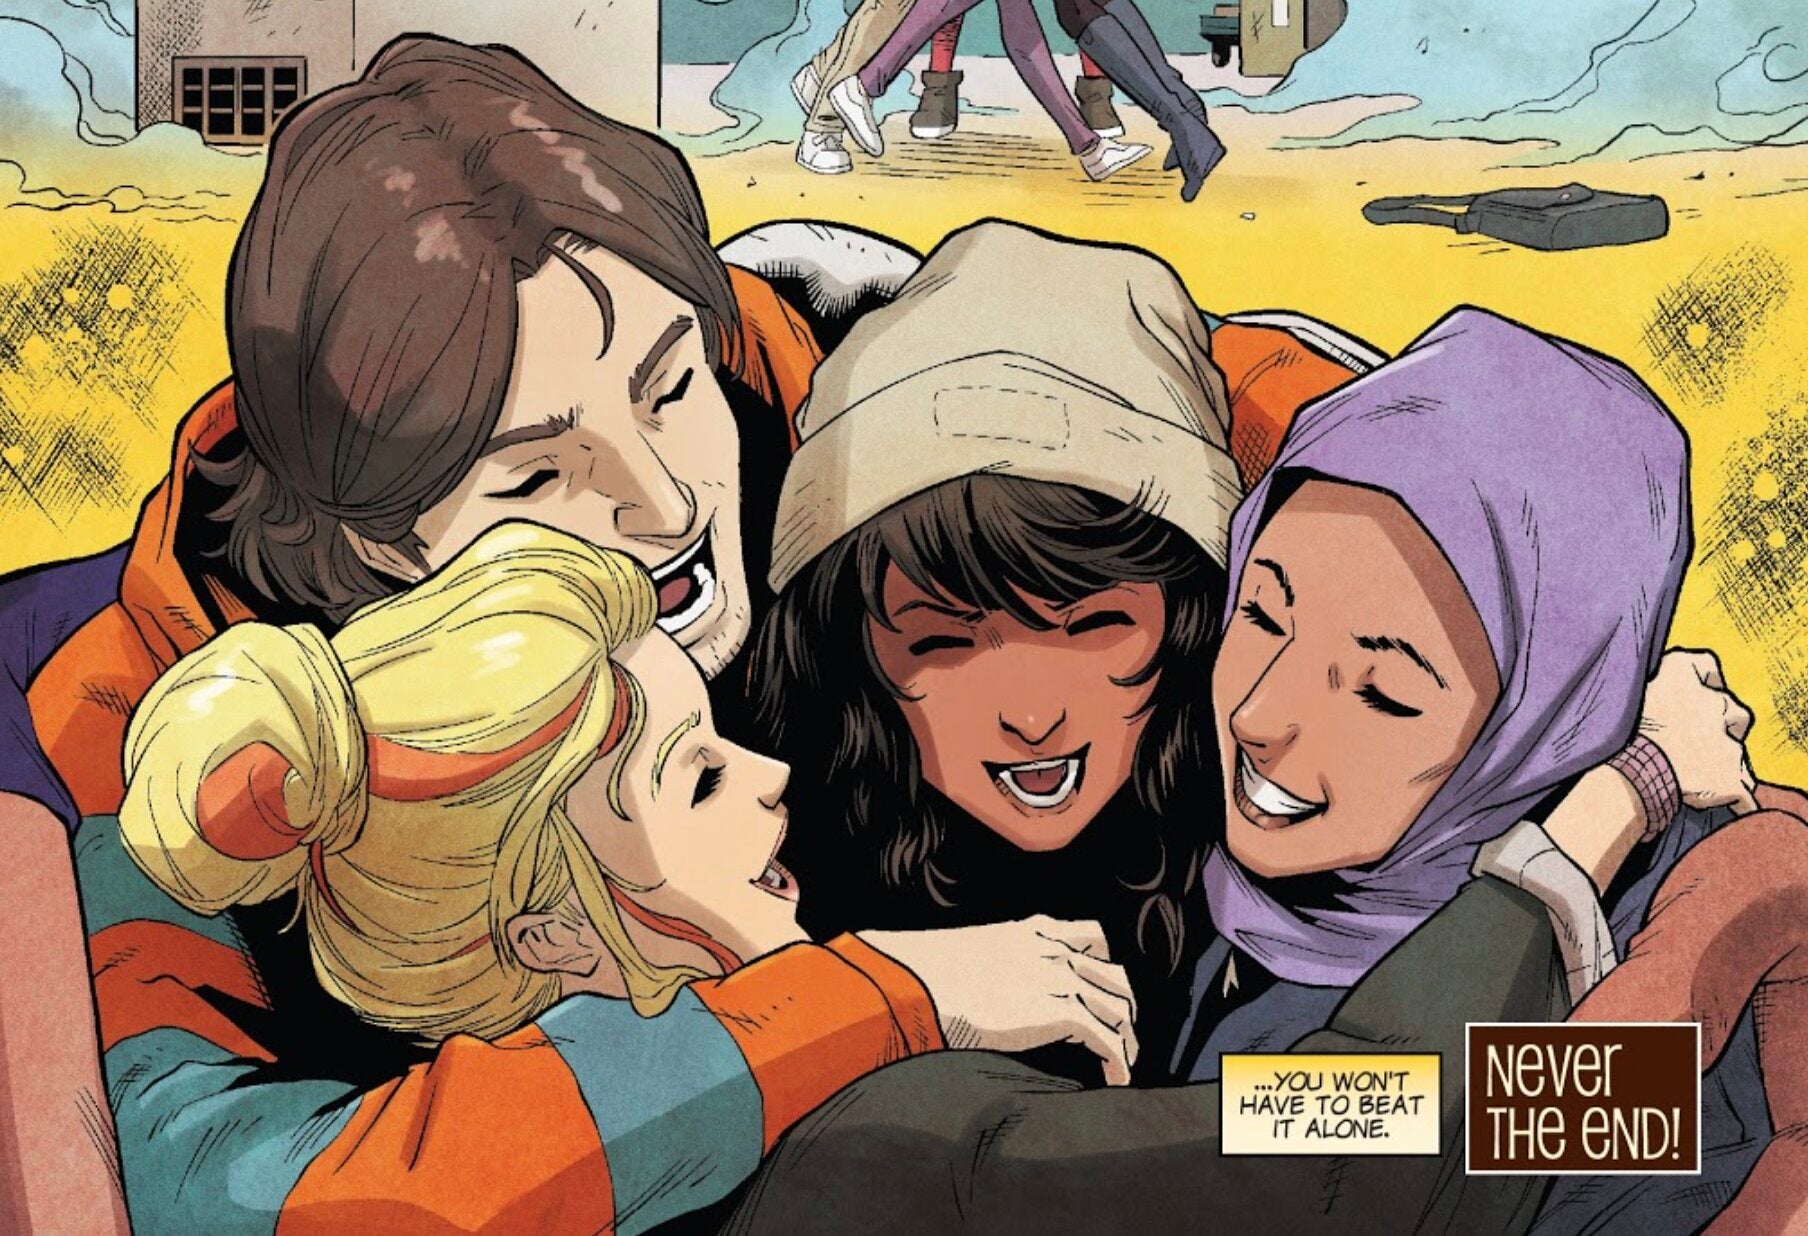 Image from Ms. Marvel comic of Kamala Khan and friends hugging. Caption reads: you won't have to beat it alone! Artist: Adrian Alphona